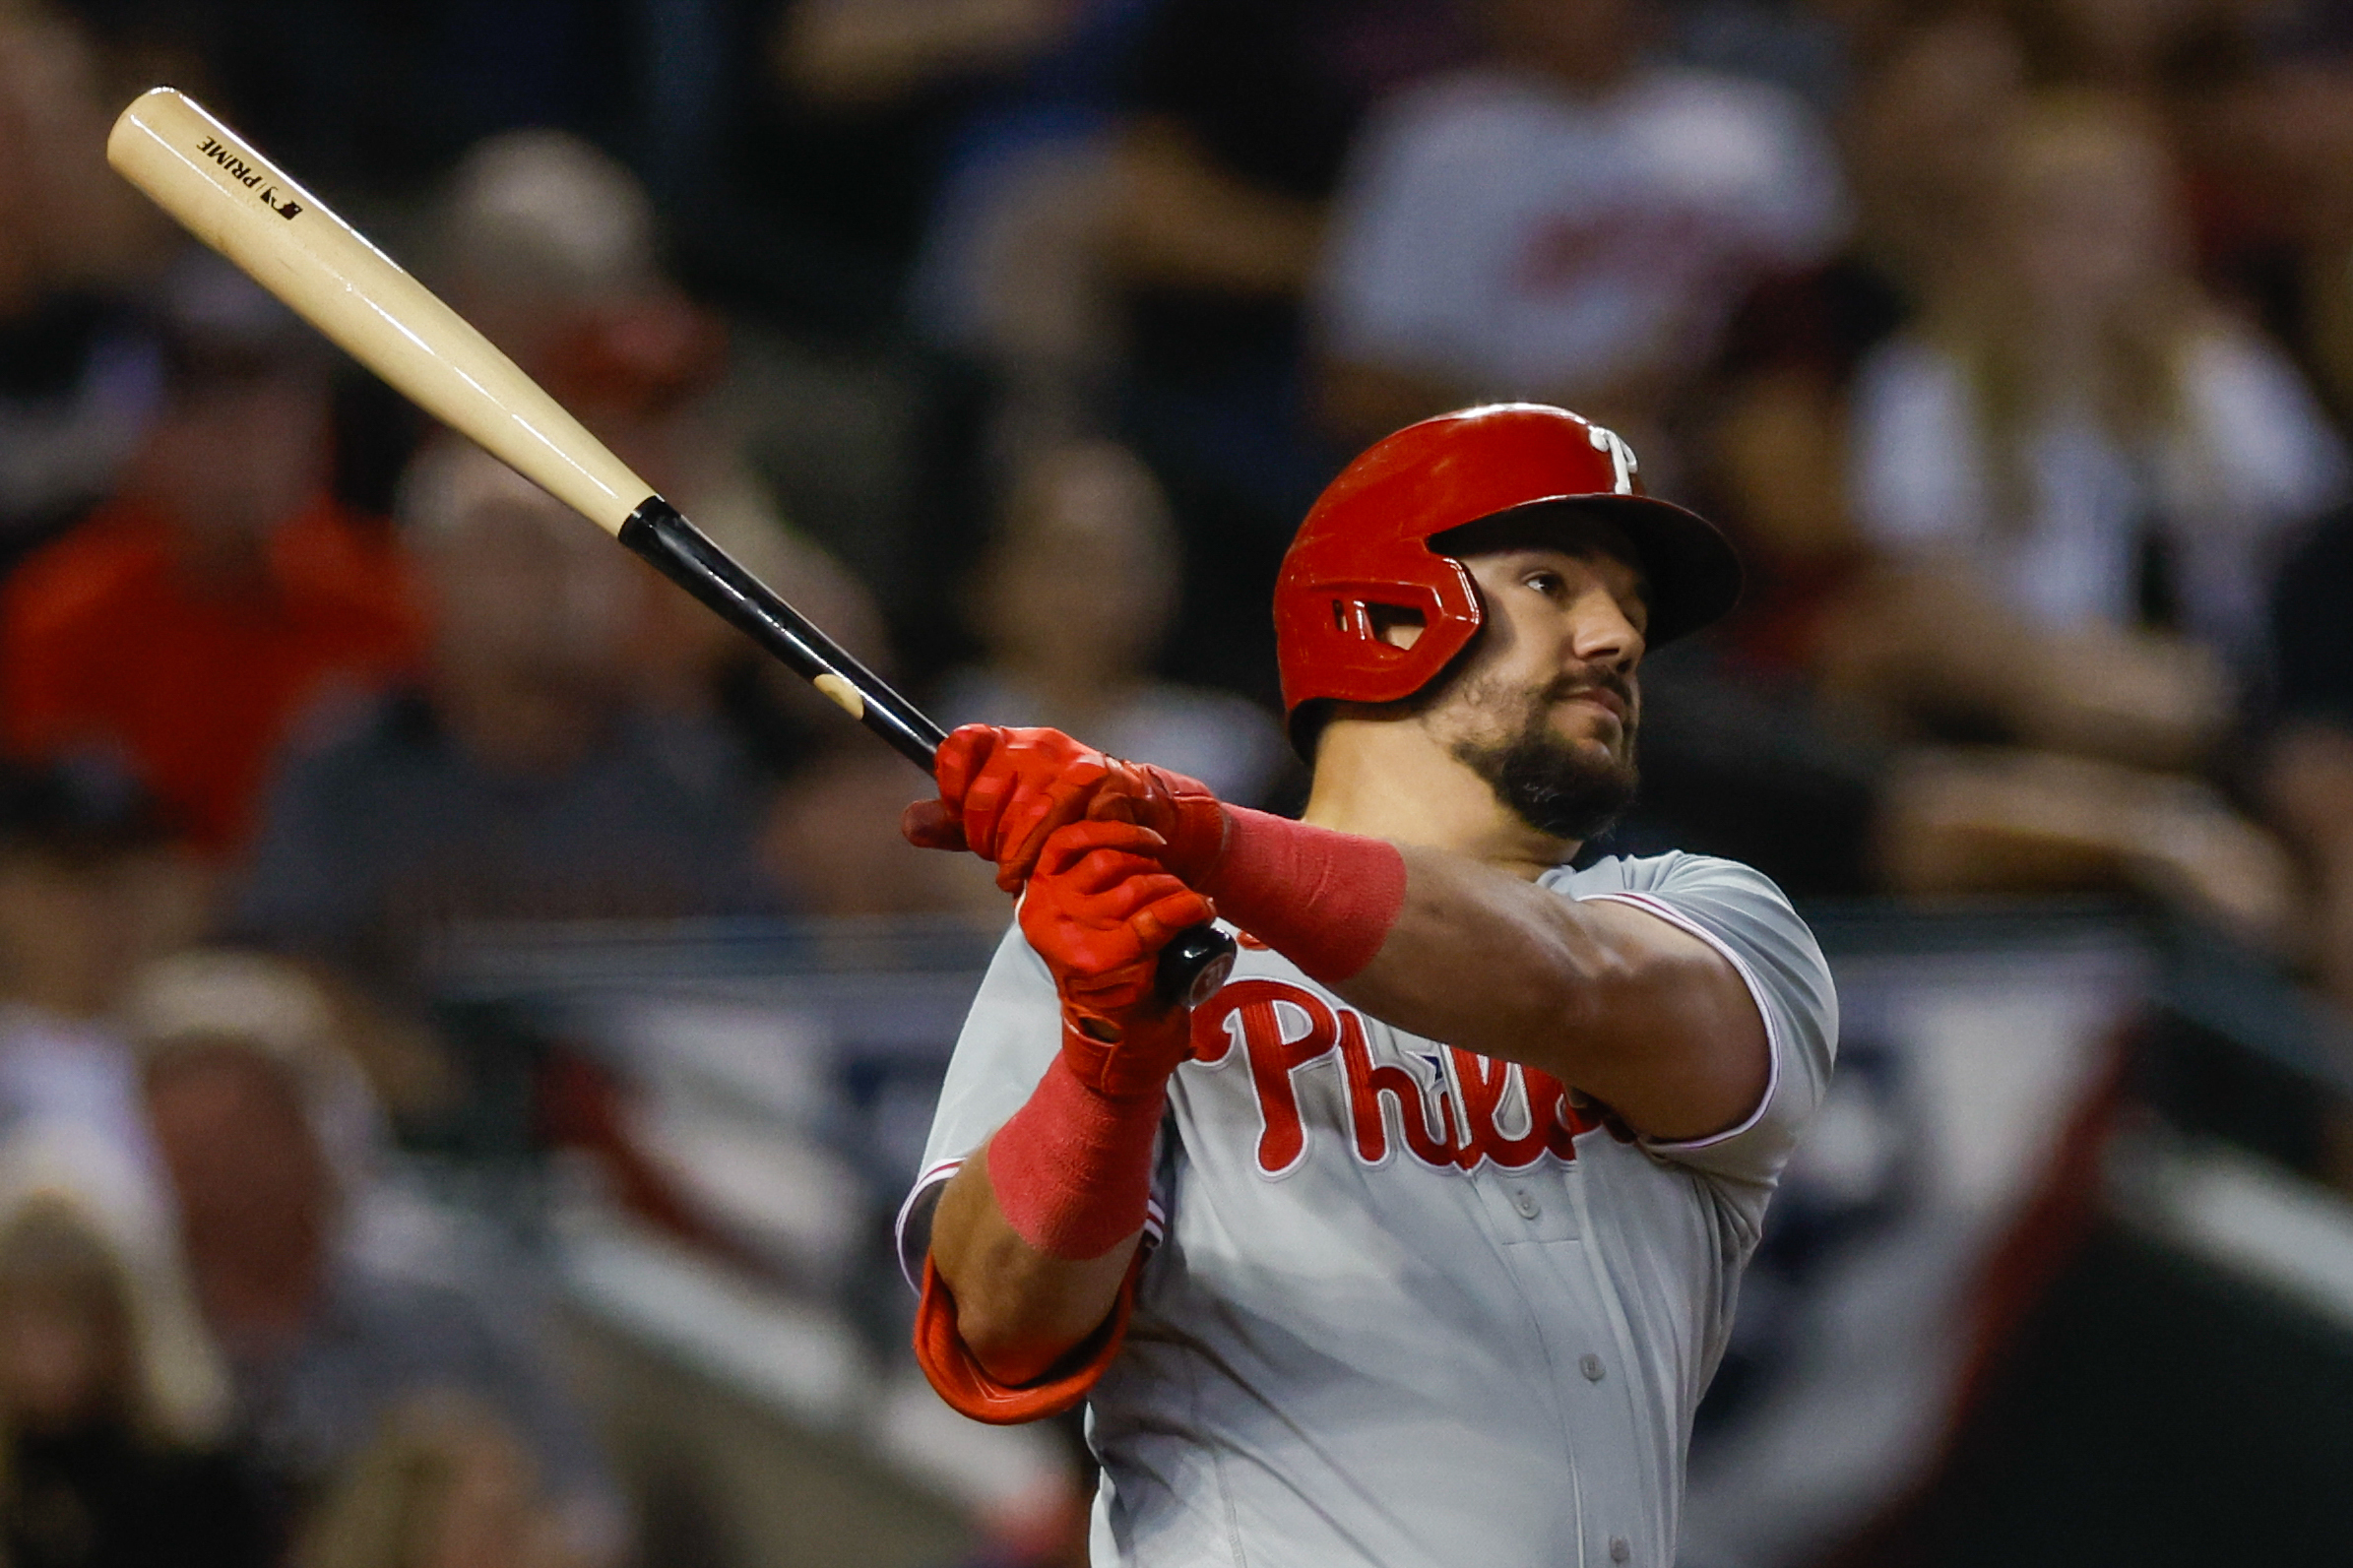 Albert Pujols Celebrated on MLB Network From This Saturday, May 2 Through  Monday, May 4